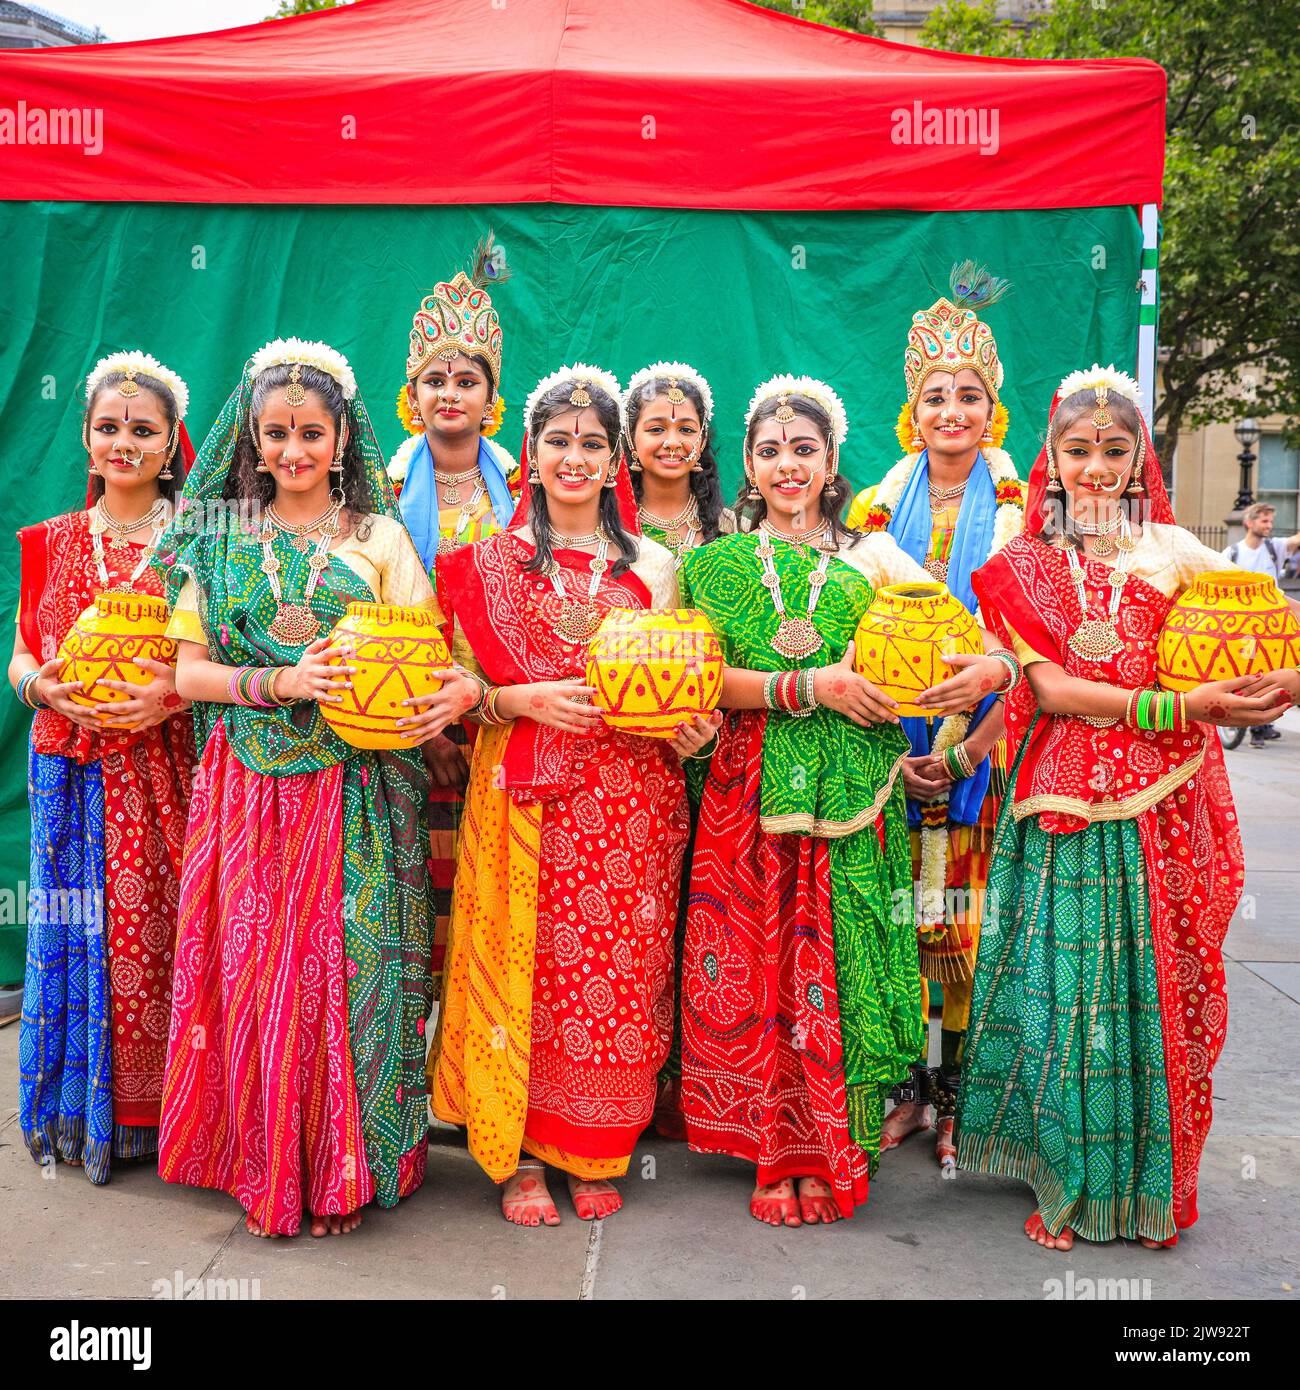 London, UK. 04th Aug, 2022. Young girls from an Odissi dance group, an ancient Indian classical dance, are excited to take part in the festivities. The Hindu Ratha Yatra Festival (alternative spelling Rathayatra), or Chariot Festival, falls on the 4th of September this year and is celebrated in London with a procession of the chariots and deities from Hyde Park to Trafalgar Square, accompanied by the public, followed festivities, free food and performances in Trafalgar Square. Credit: Imageplotter/Alamy Live News Stock Photo